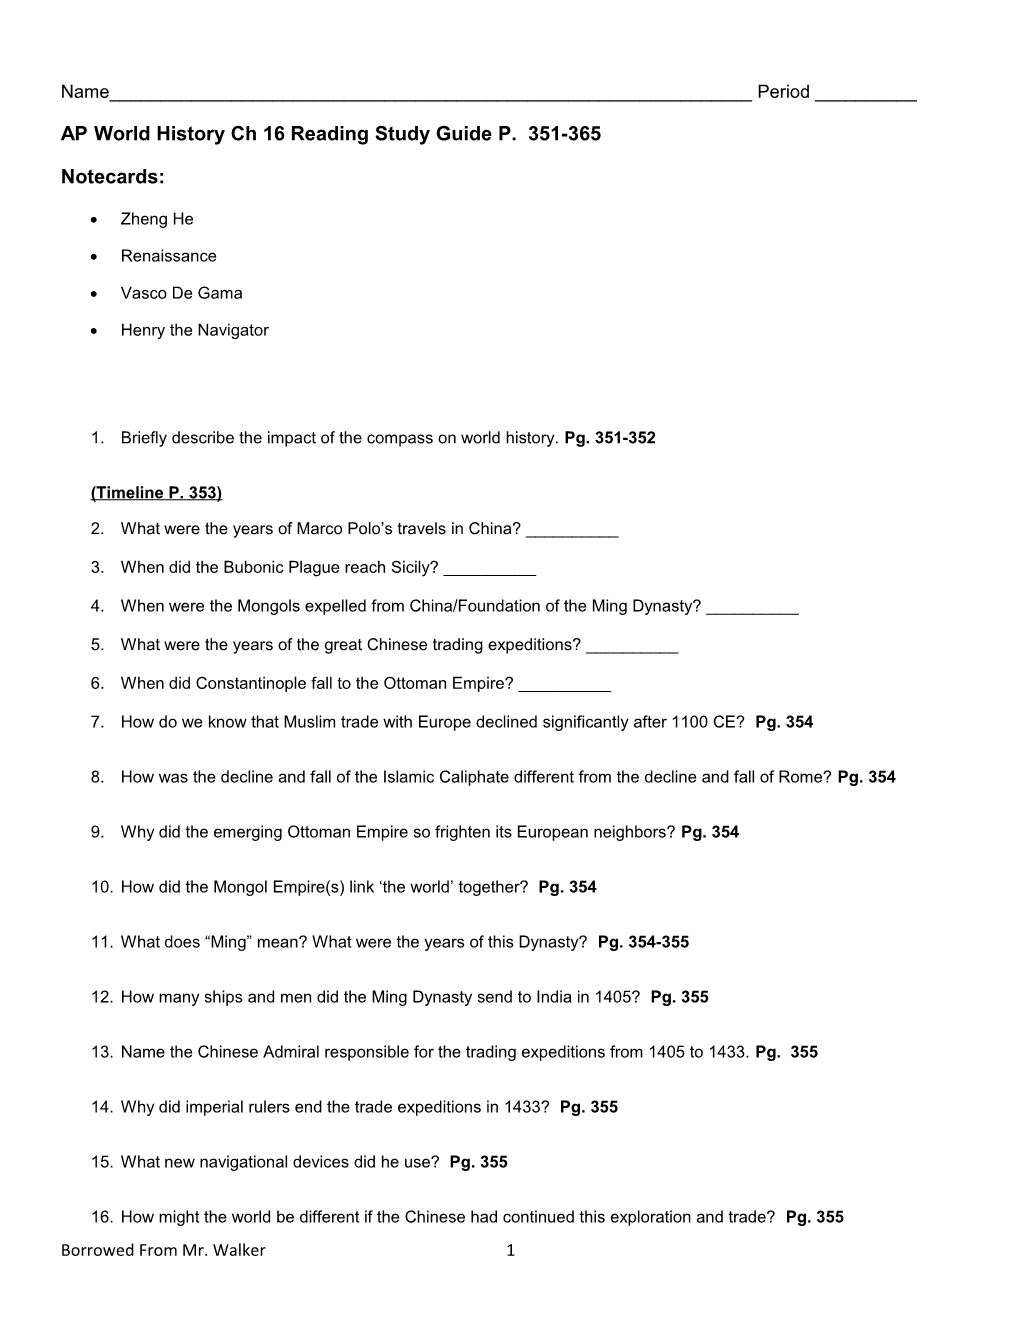 AP World History Ch 16 Reading Study Guide P. 351-365